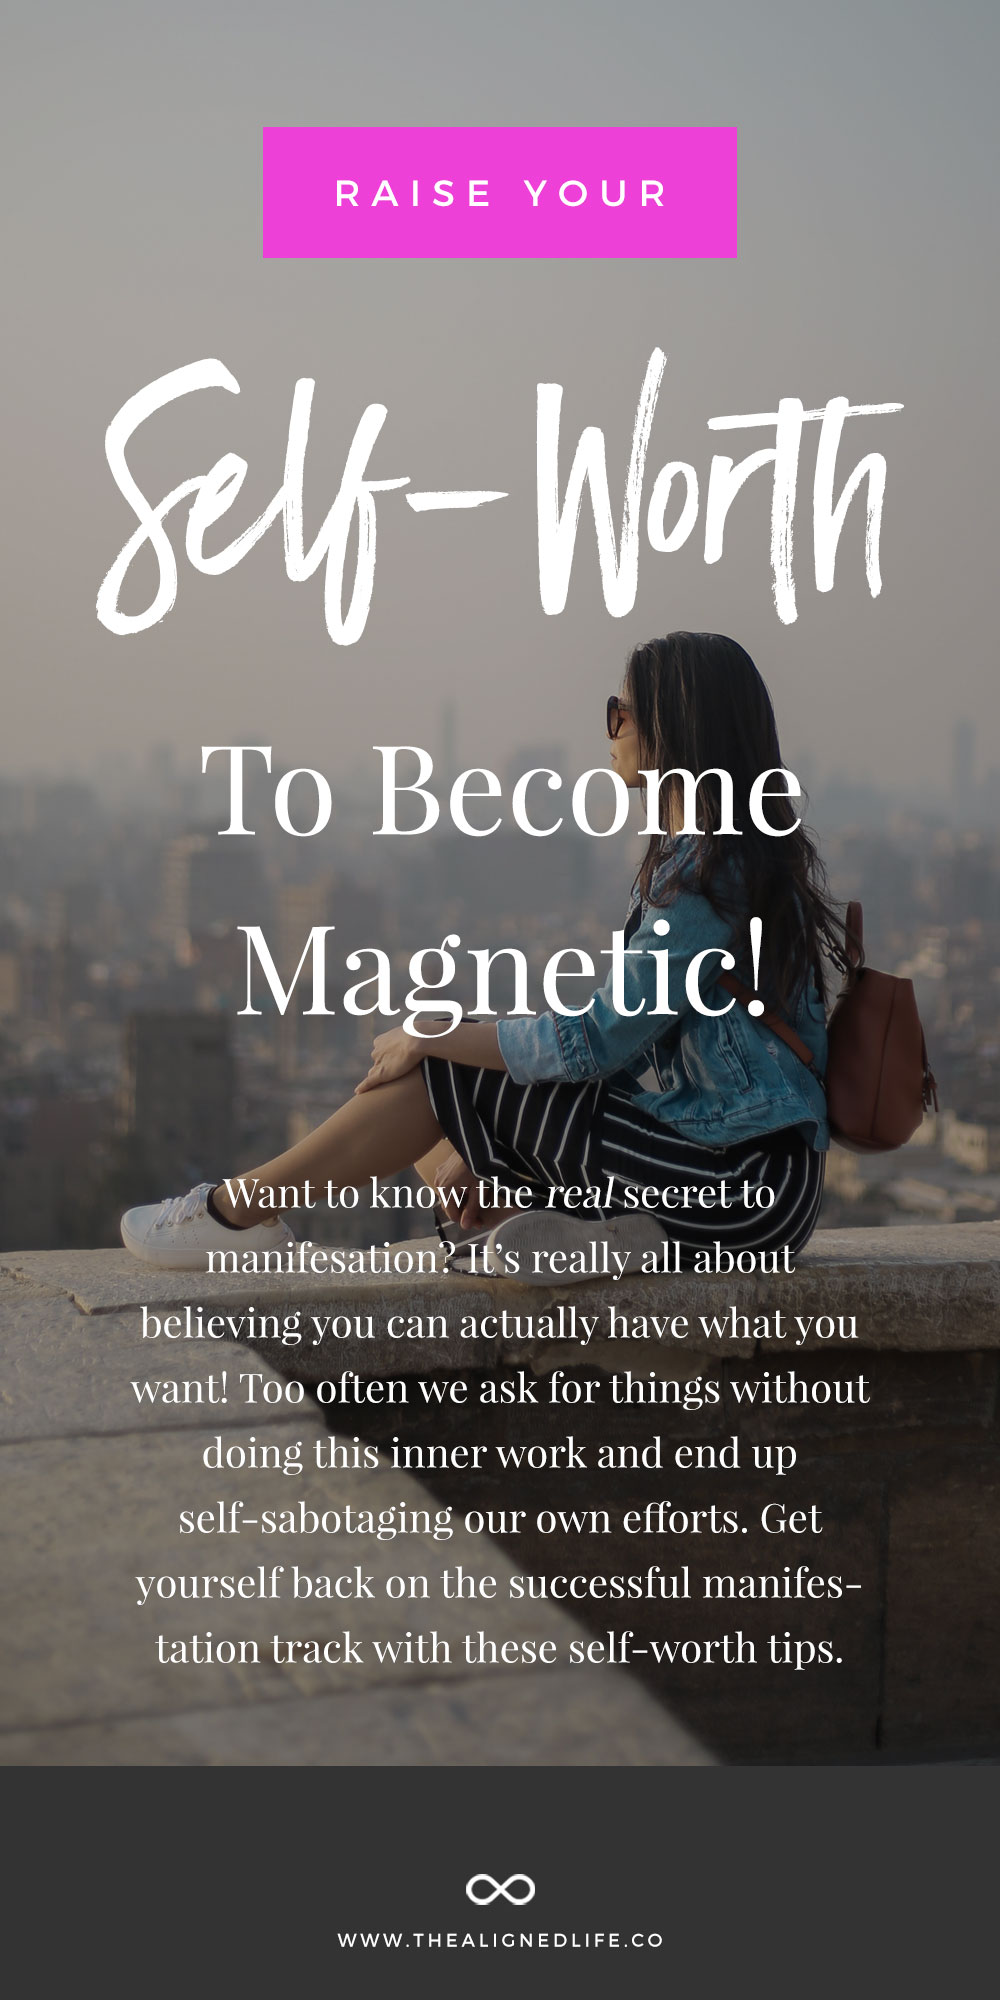 Raise Your Self-Worth To Become Magnetic